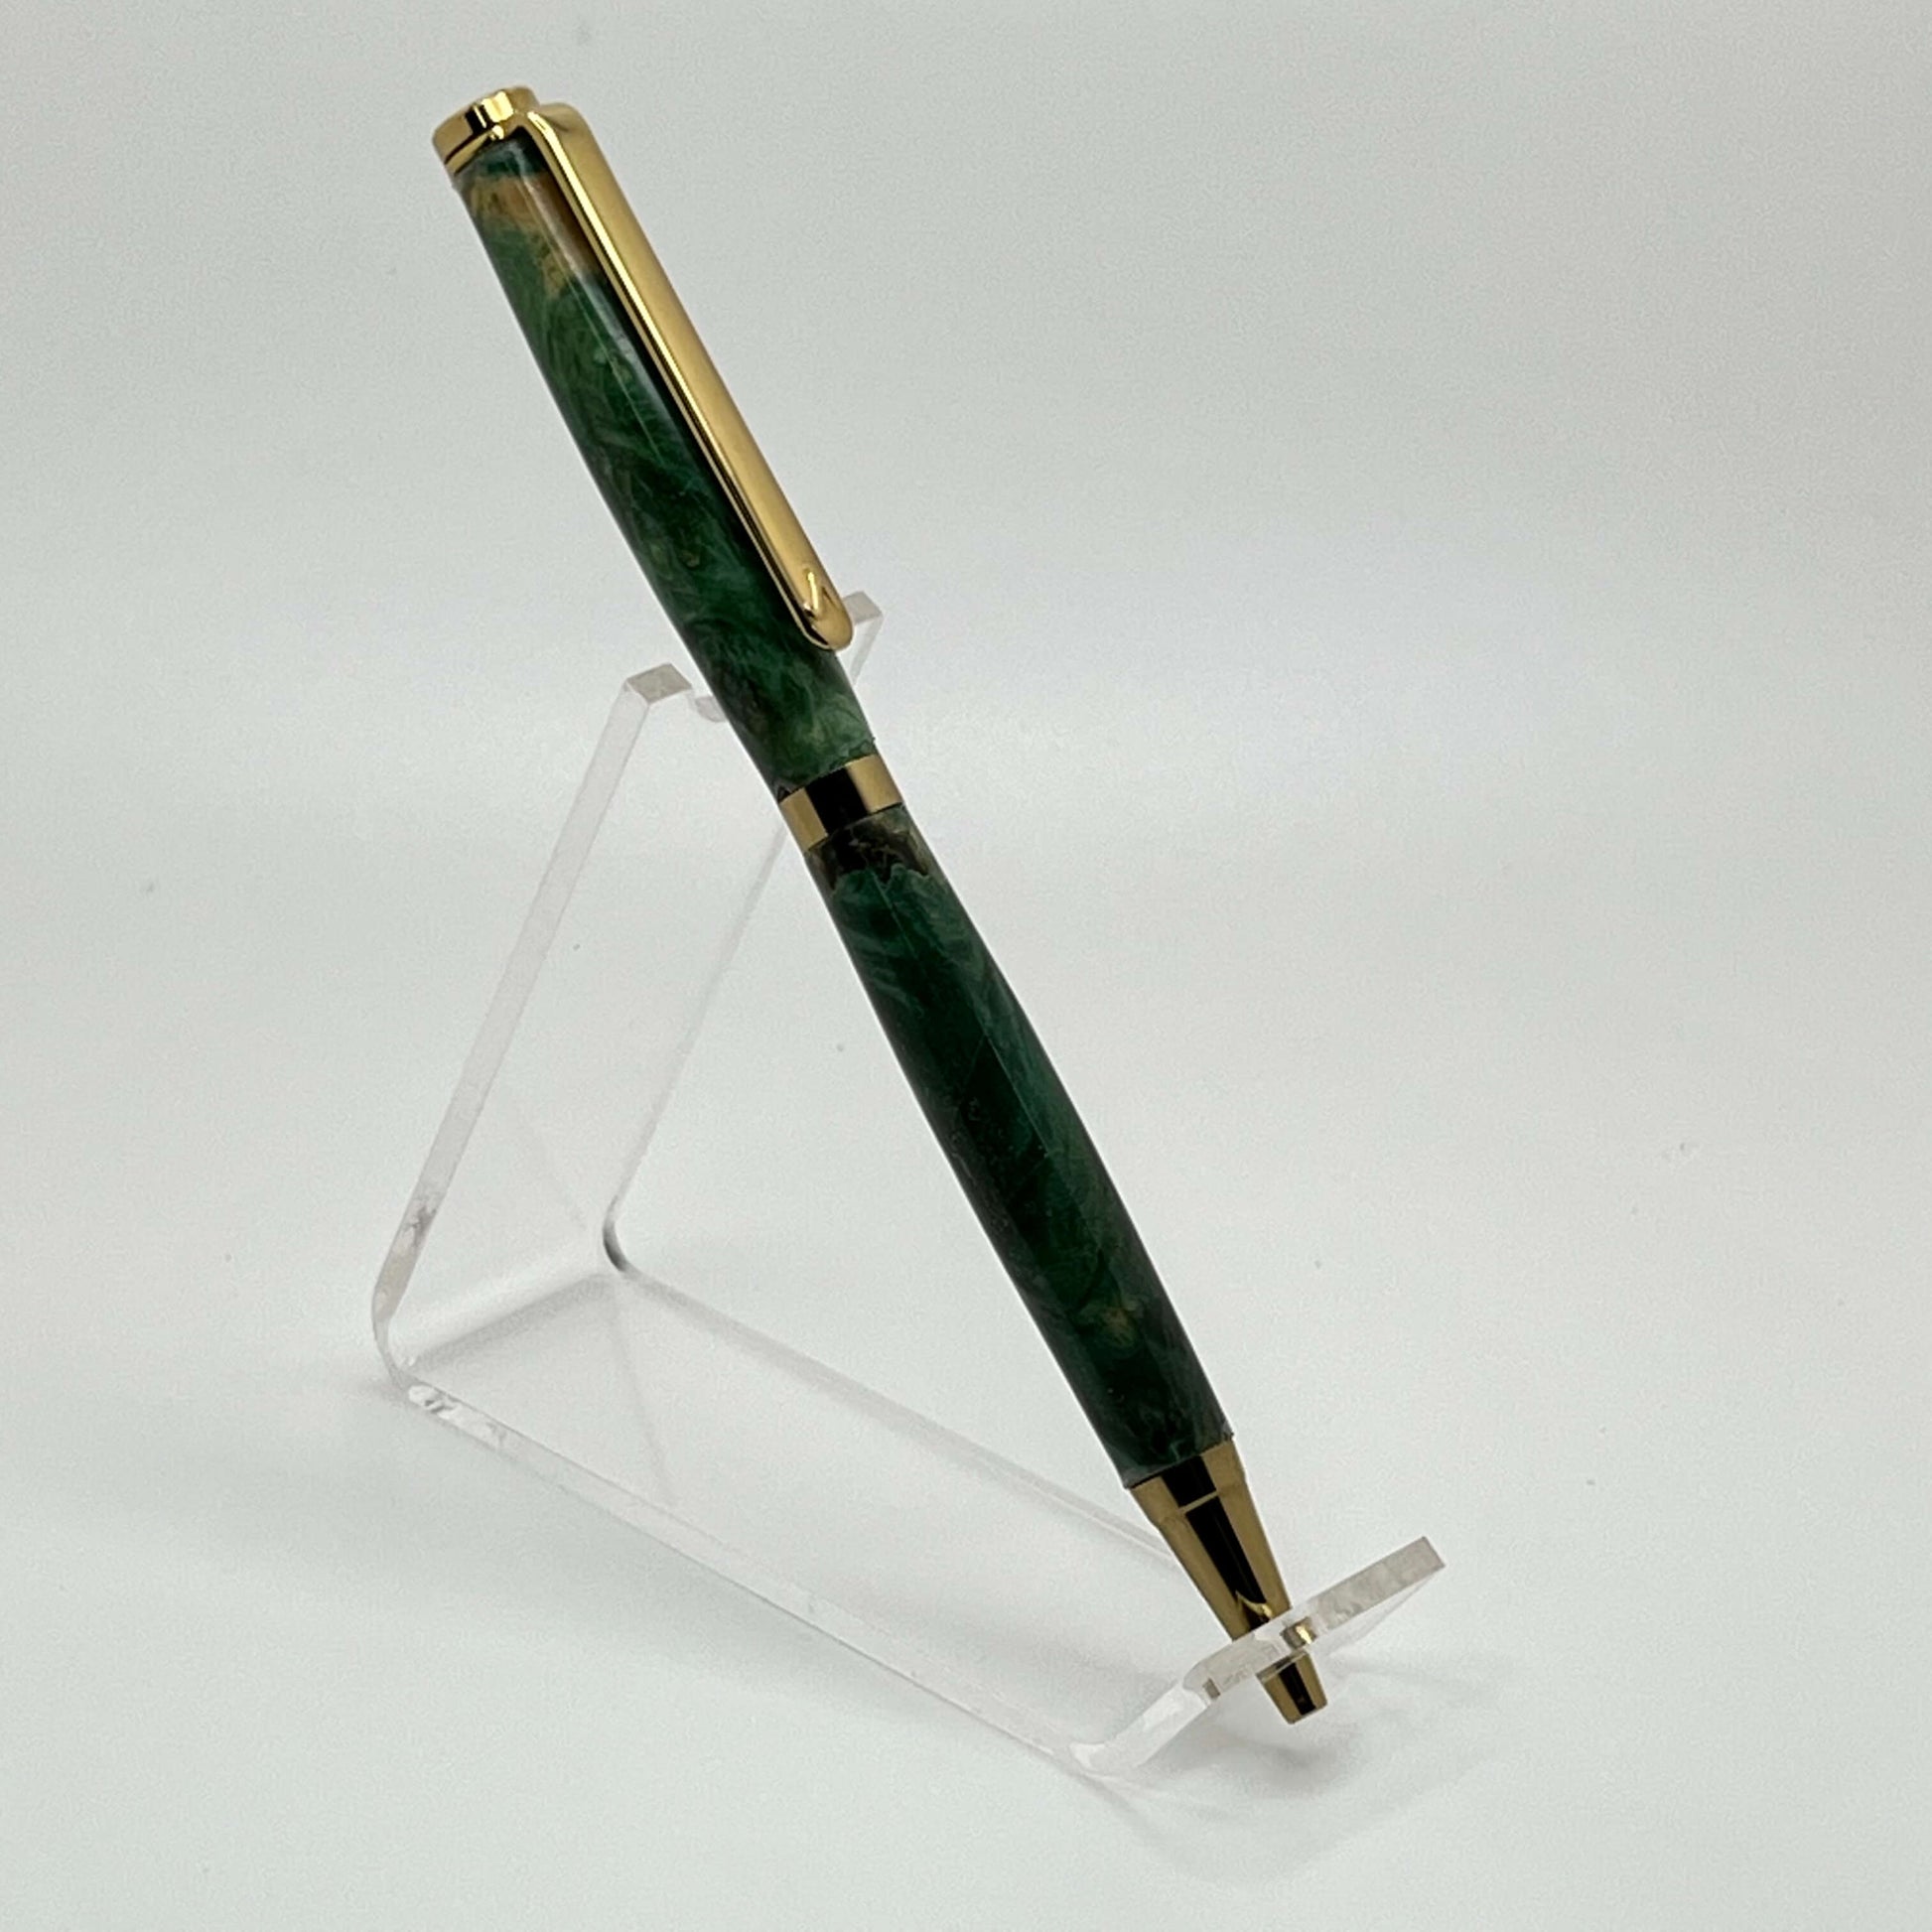 Right side view of handcrafted pen with Box Elder Burl wood dyed green